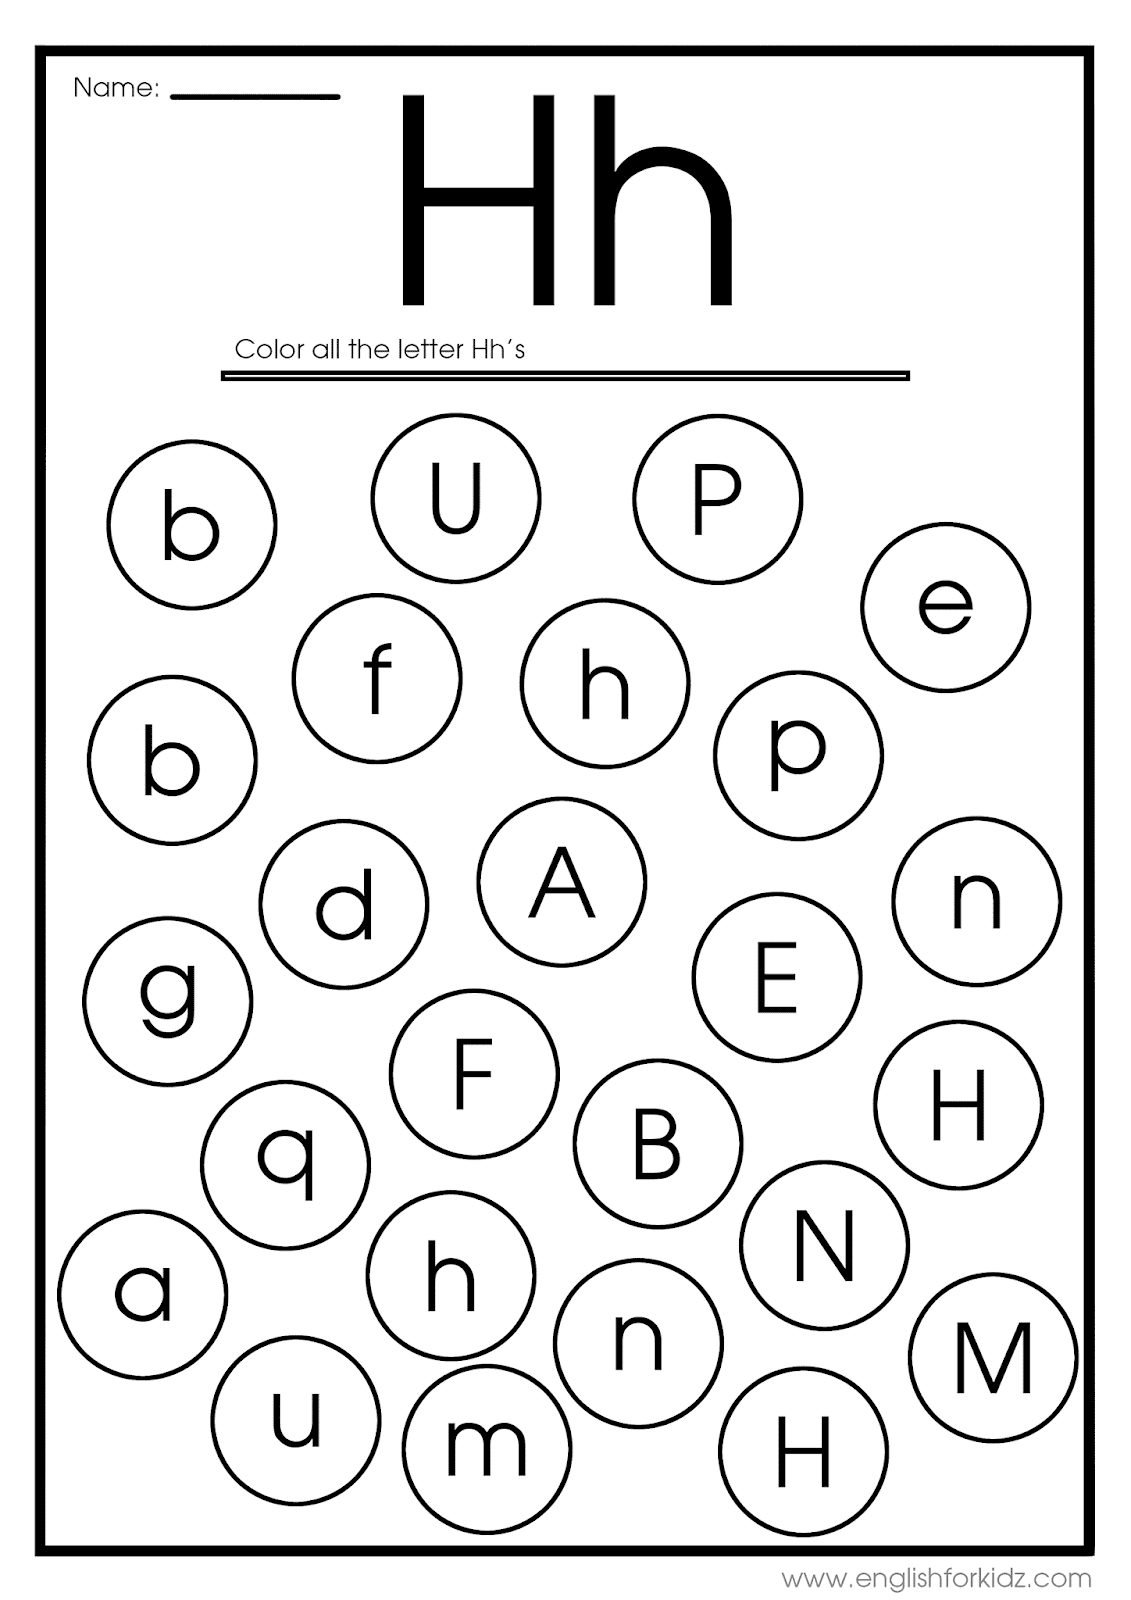 Letter H Worksheets, Flash Cards, Coloring Pages for Letter H Worksheets Craft